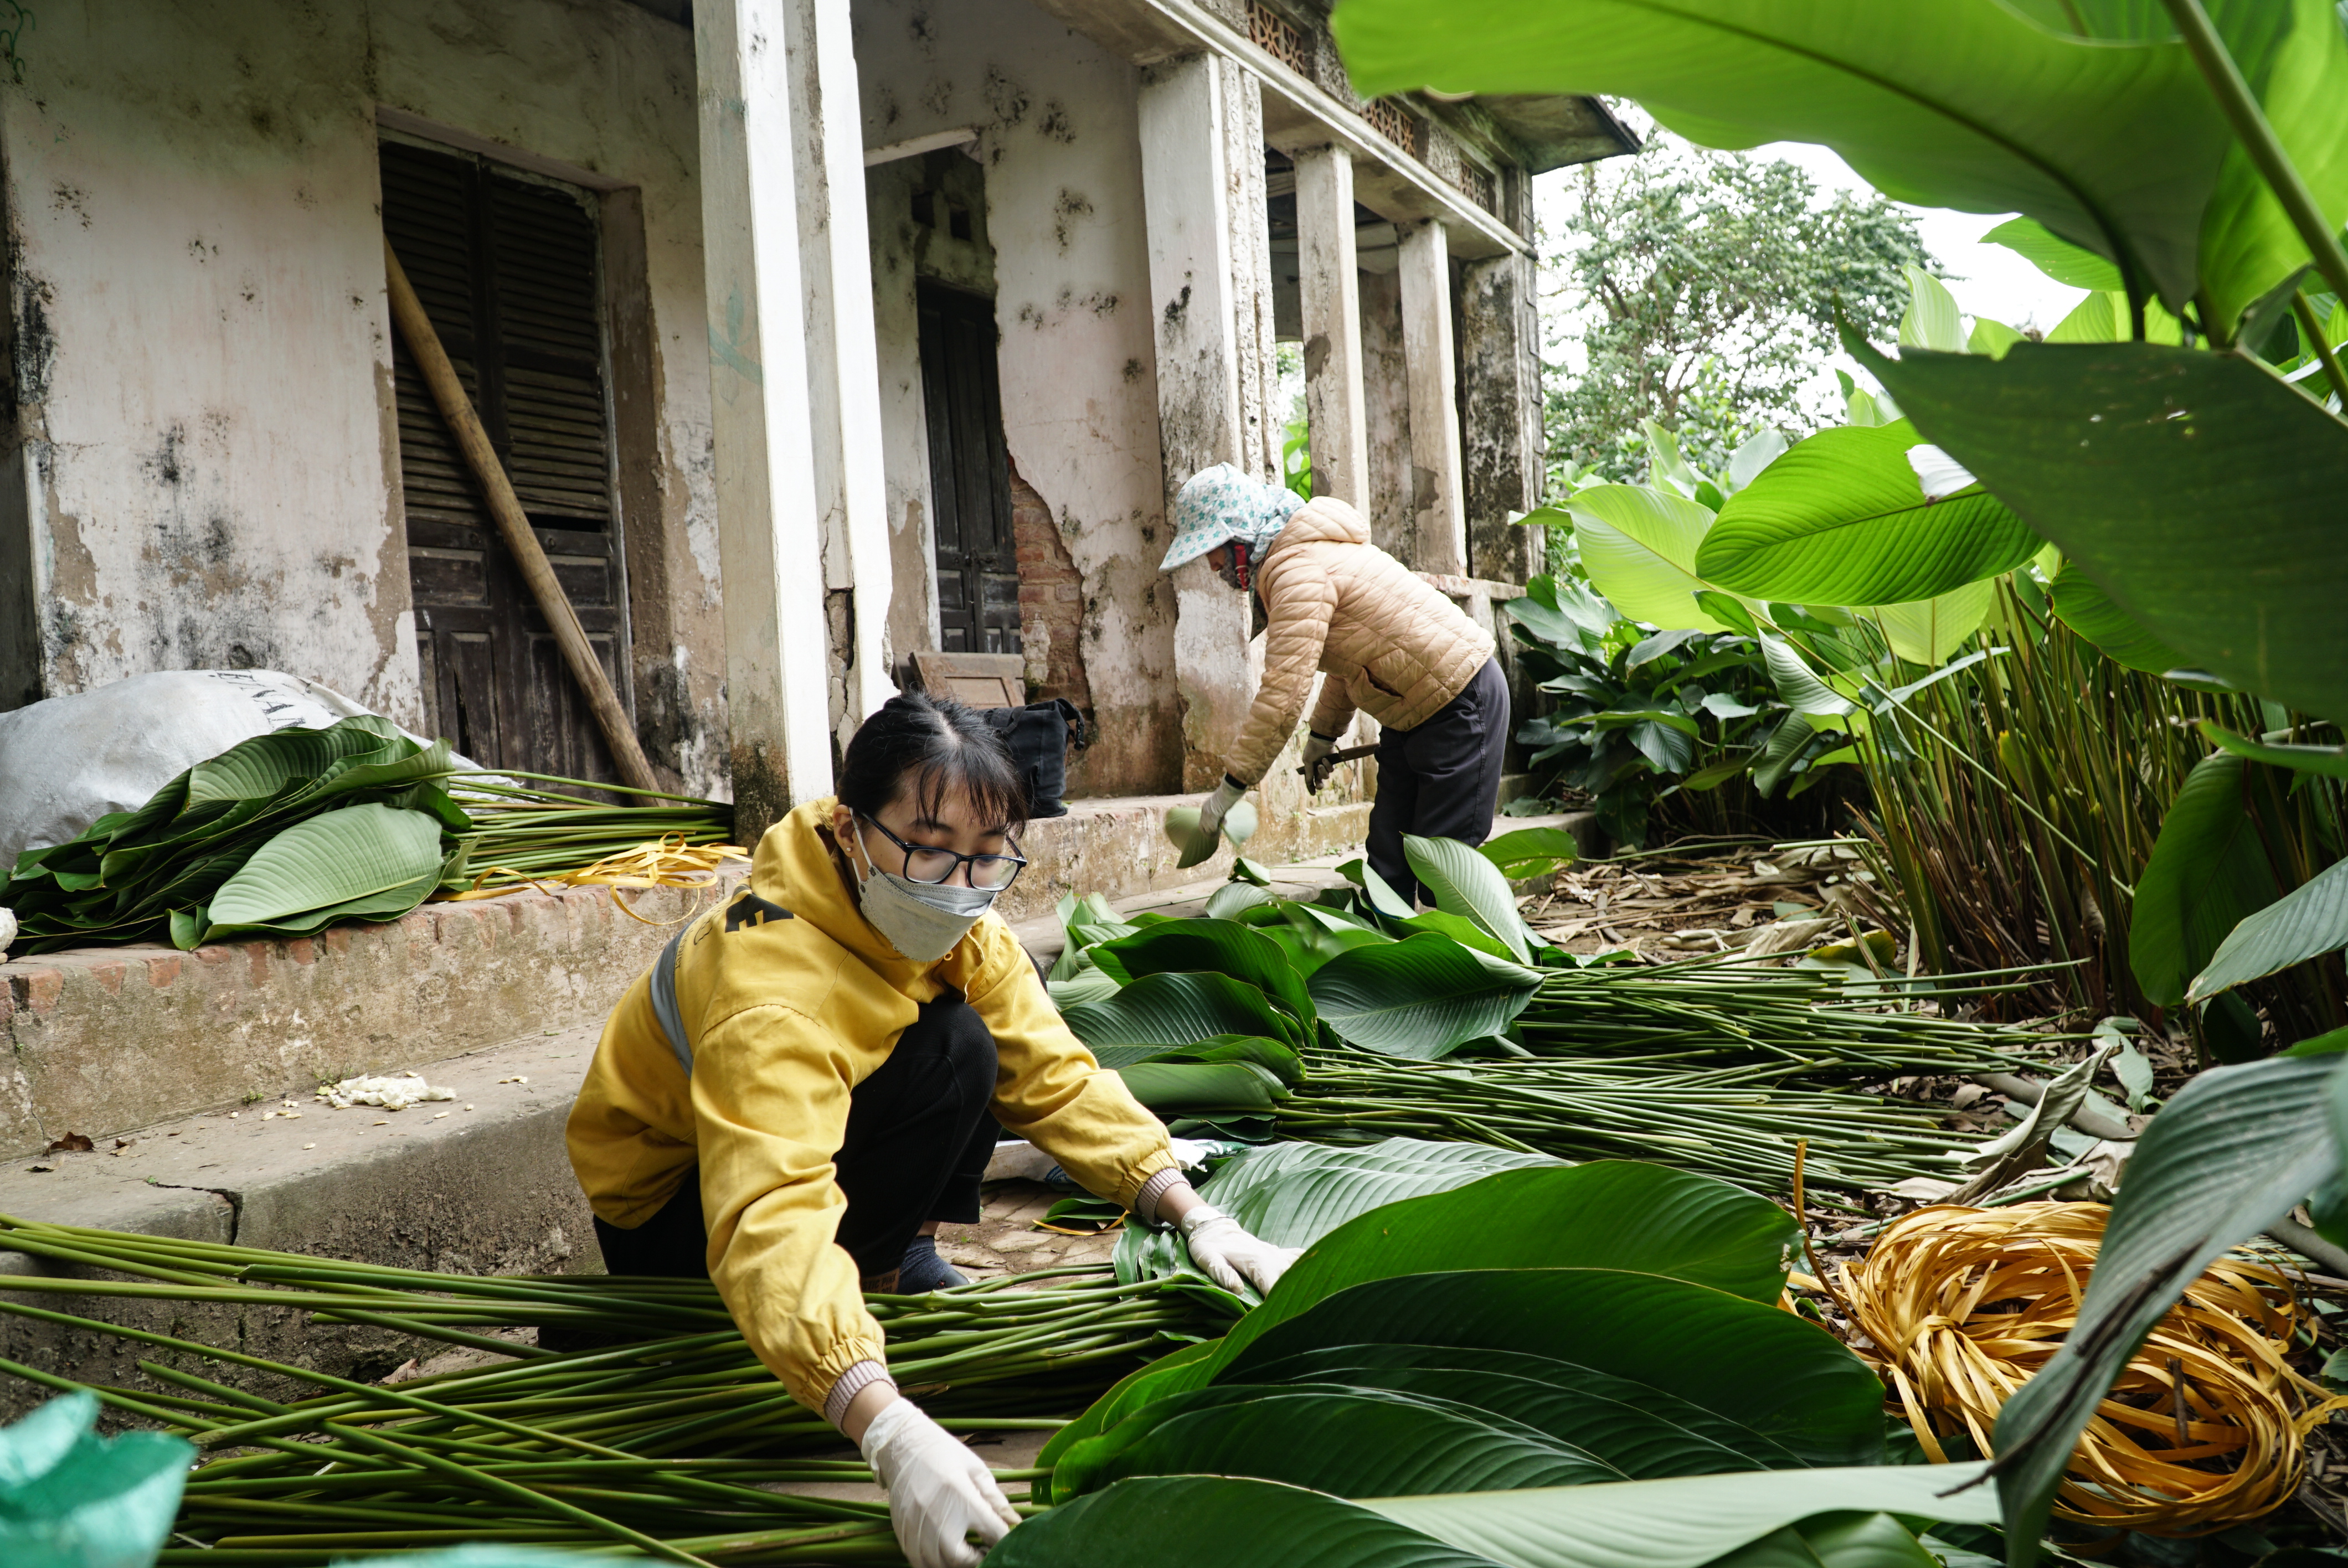 Nguyen Hien arranges ‘dong’ leaves by size at her house’s yard in Trang Cat Village, Thanh Oai District, Hanoi. Photo: Nguyen Hien / Tuoi Tre